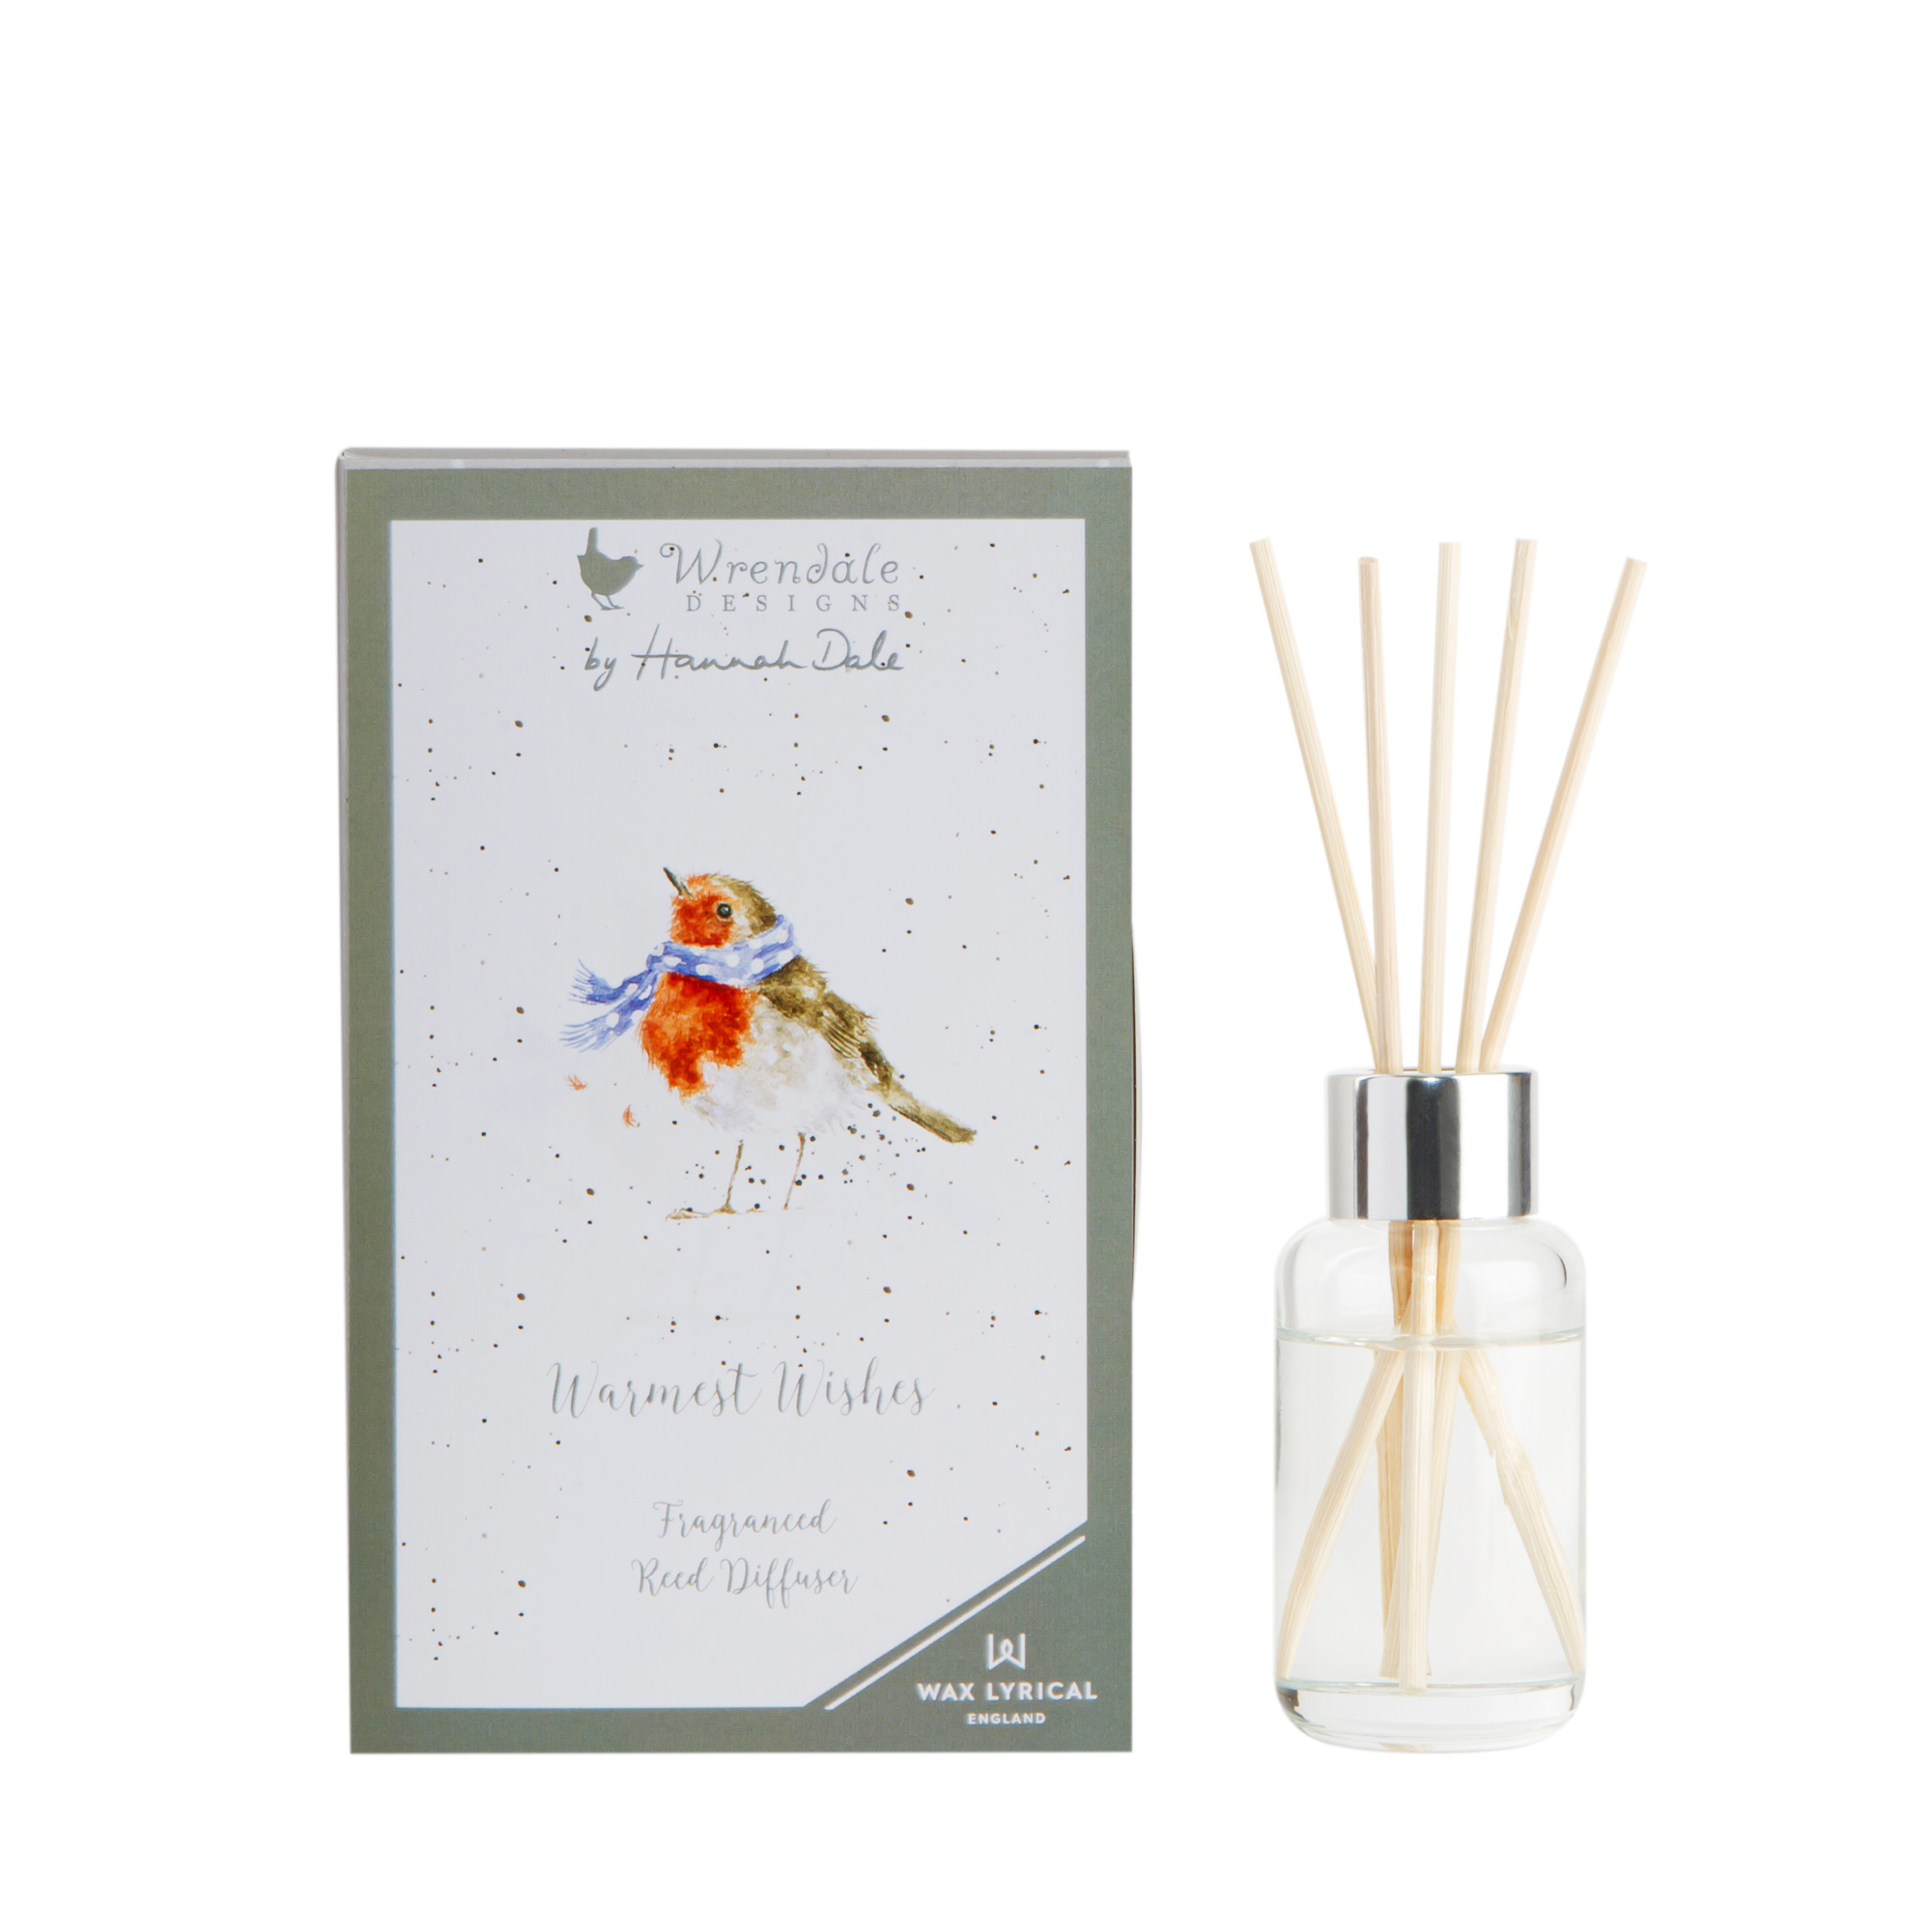 Wrendale Designs Warmest Wishes Reed Diffuser 40ml Reed Diffuser Gift Box image number null